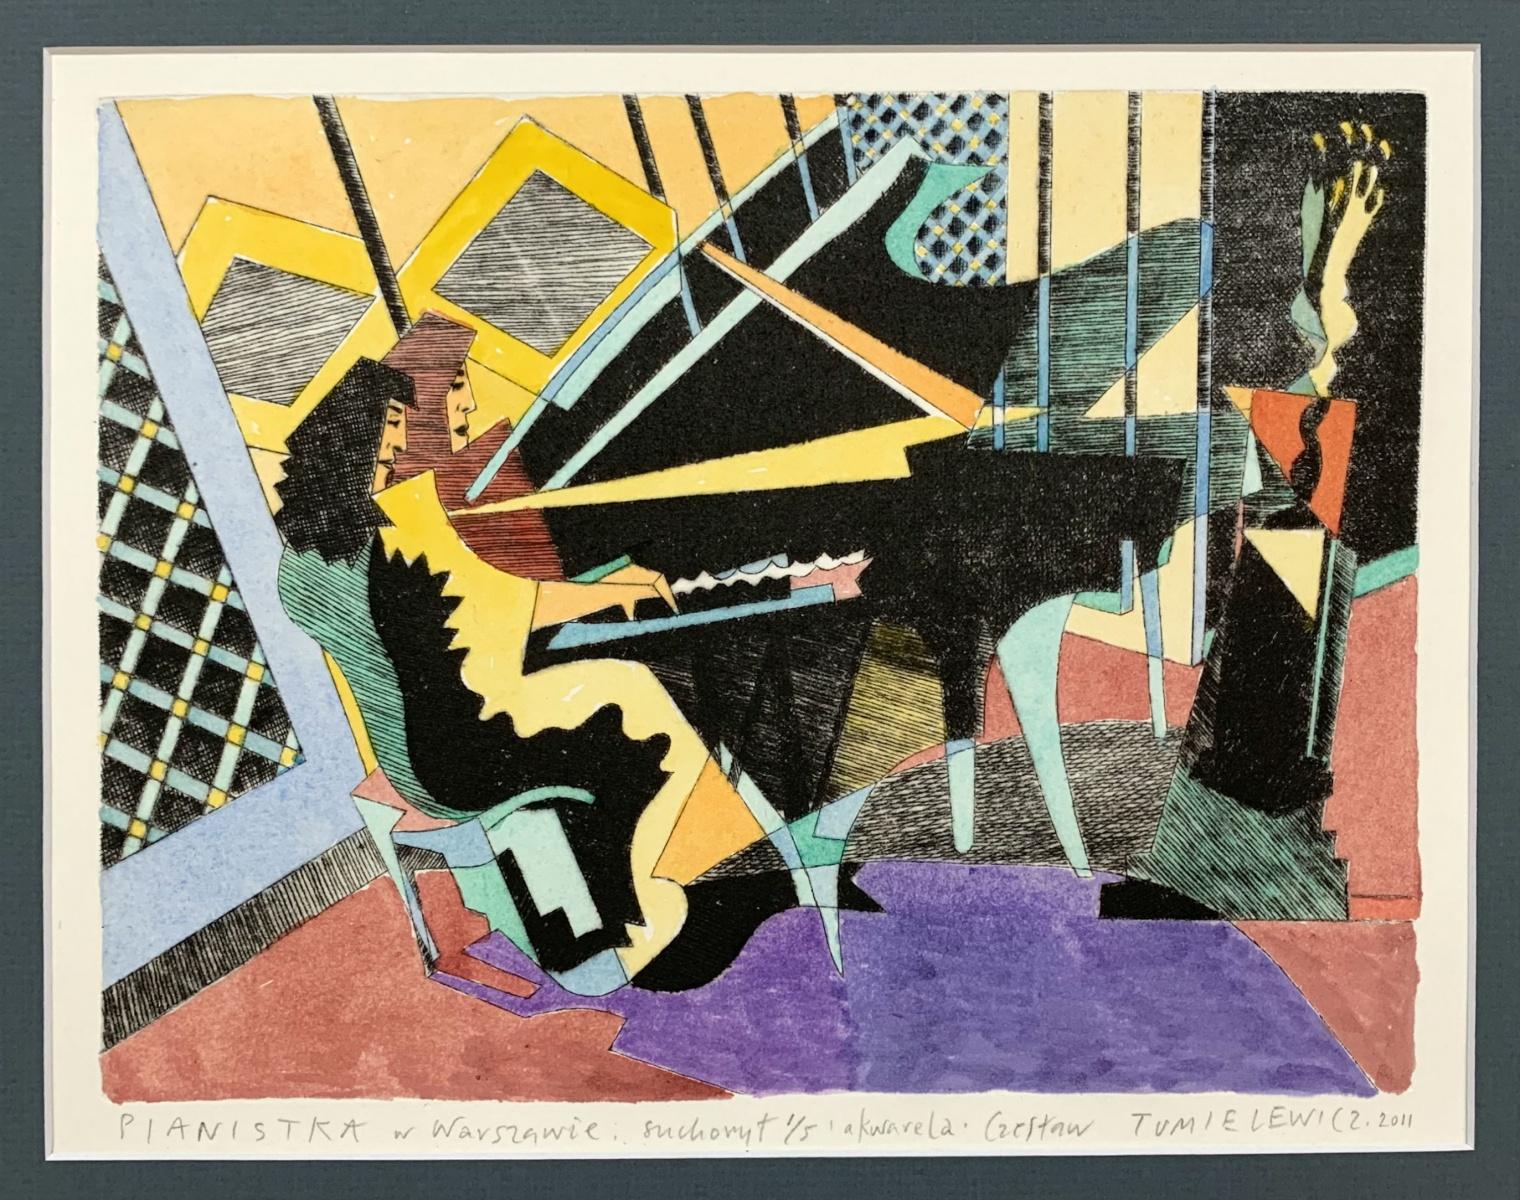 Pianist in Warsaw - Figurative drypoint print & watercolor, Colorful, Music - Print by Czeslaw Tumielewicz